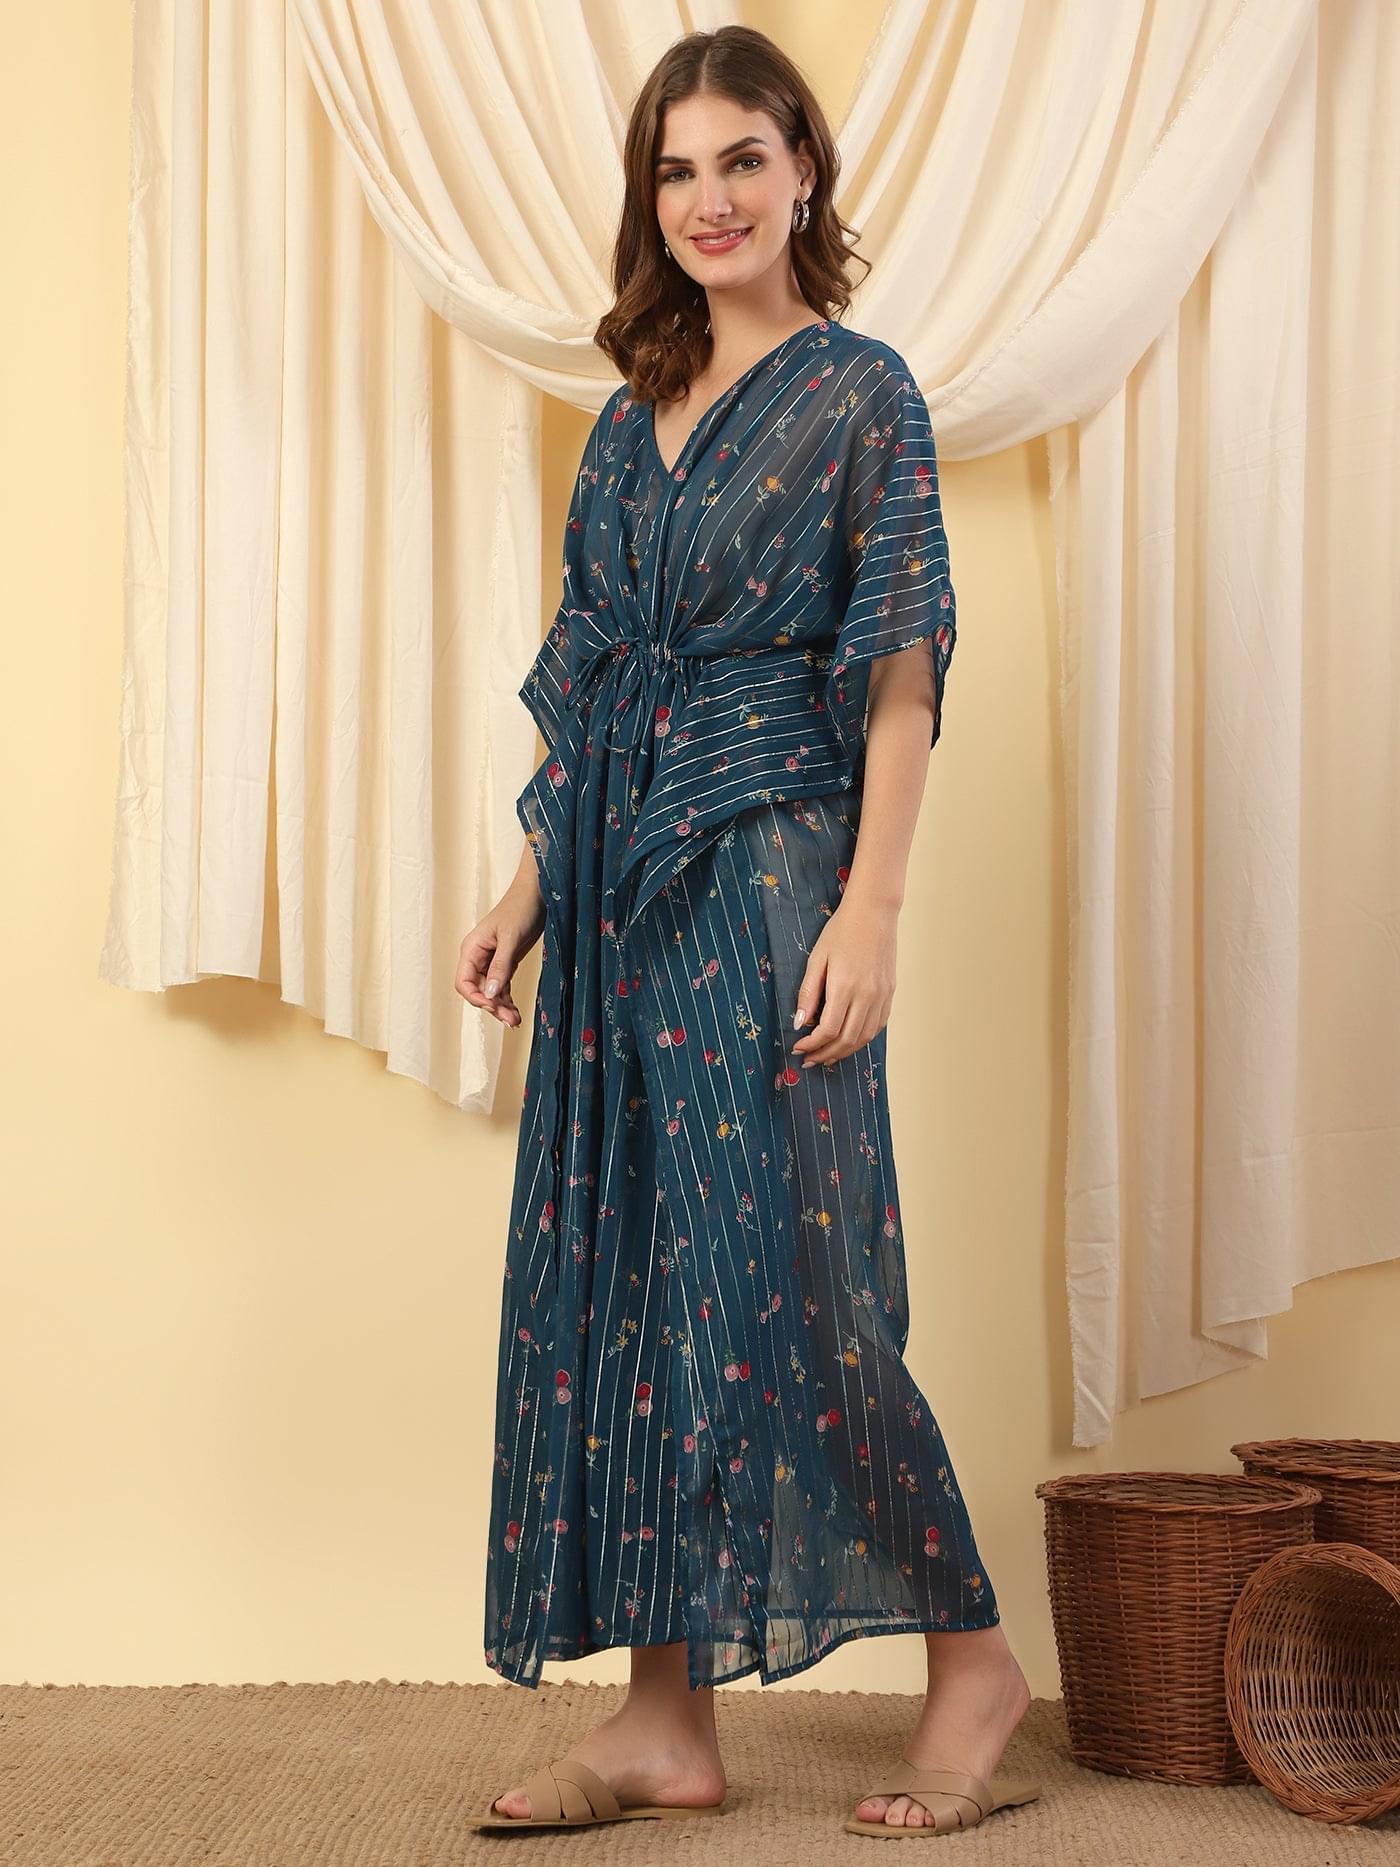 Kaftan Dresses Try These 25 Trending Designs For Fashionable Look